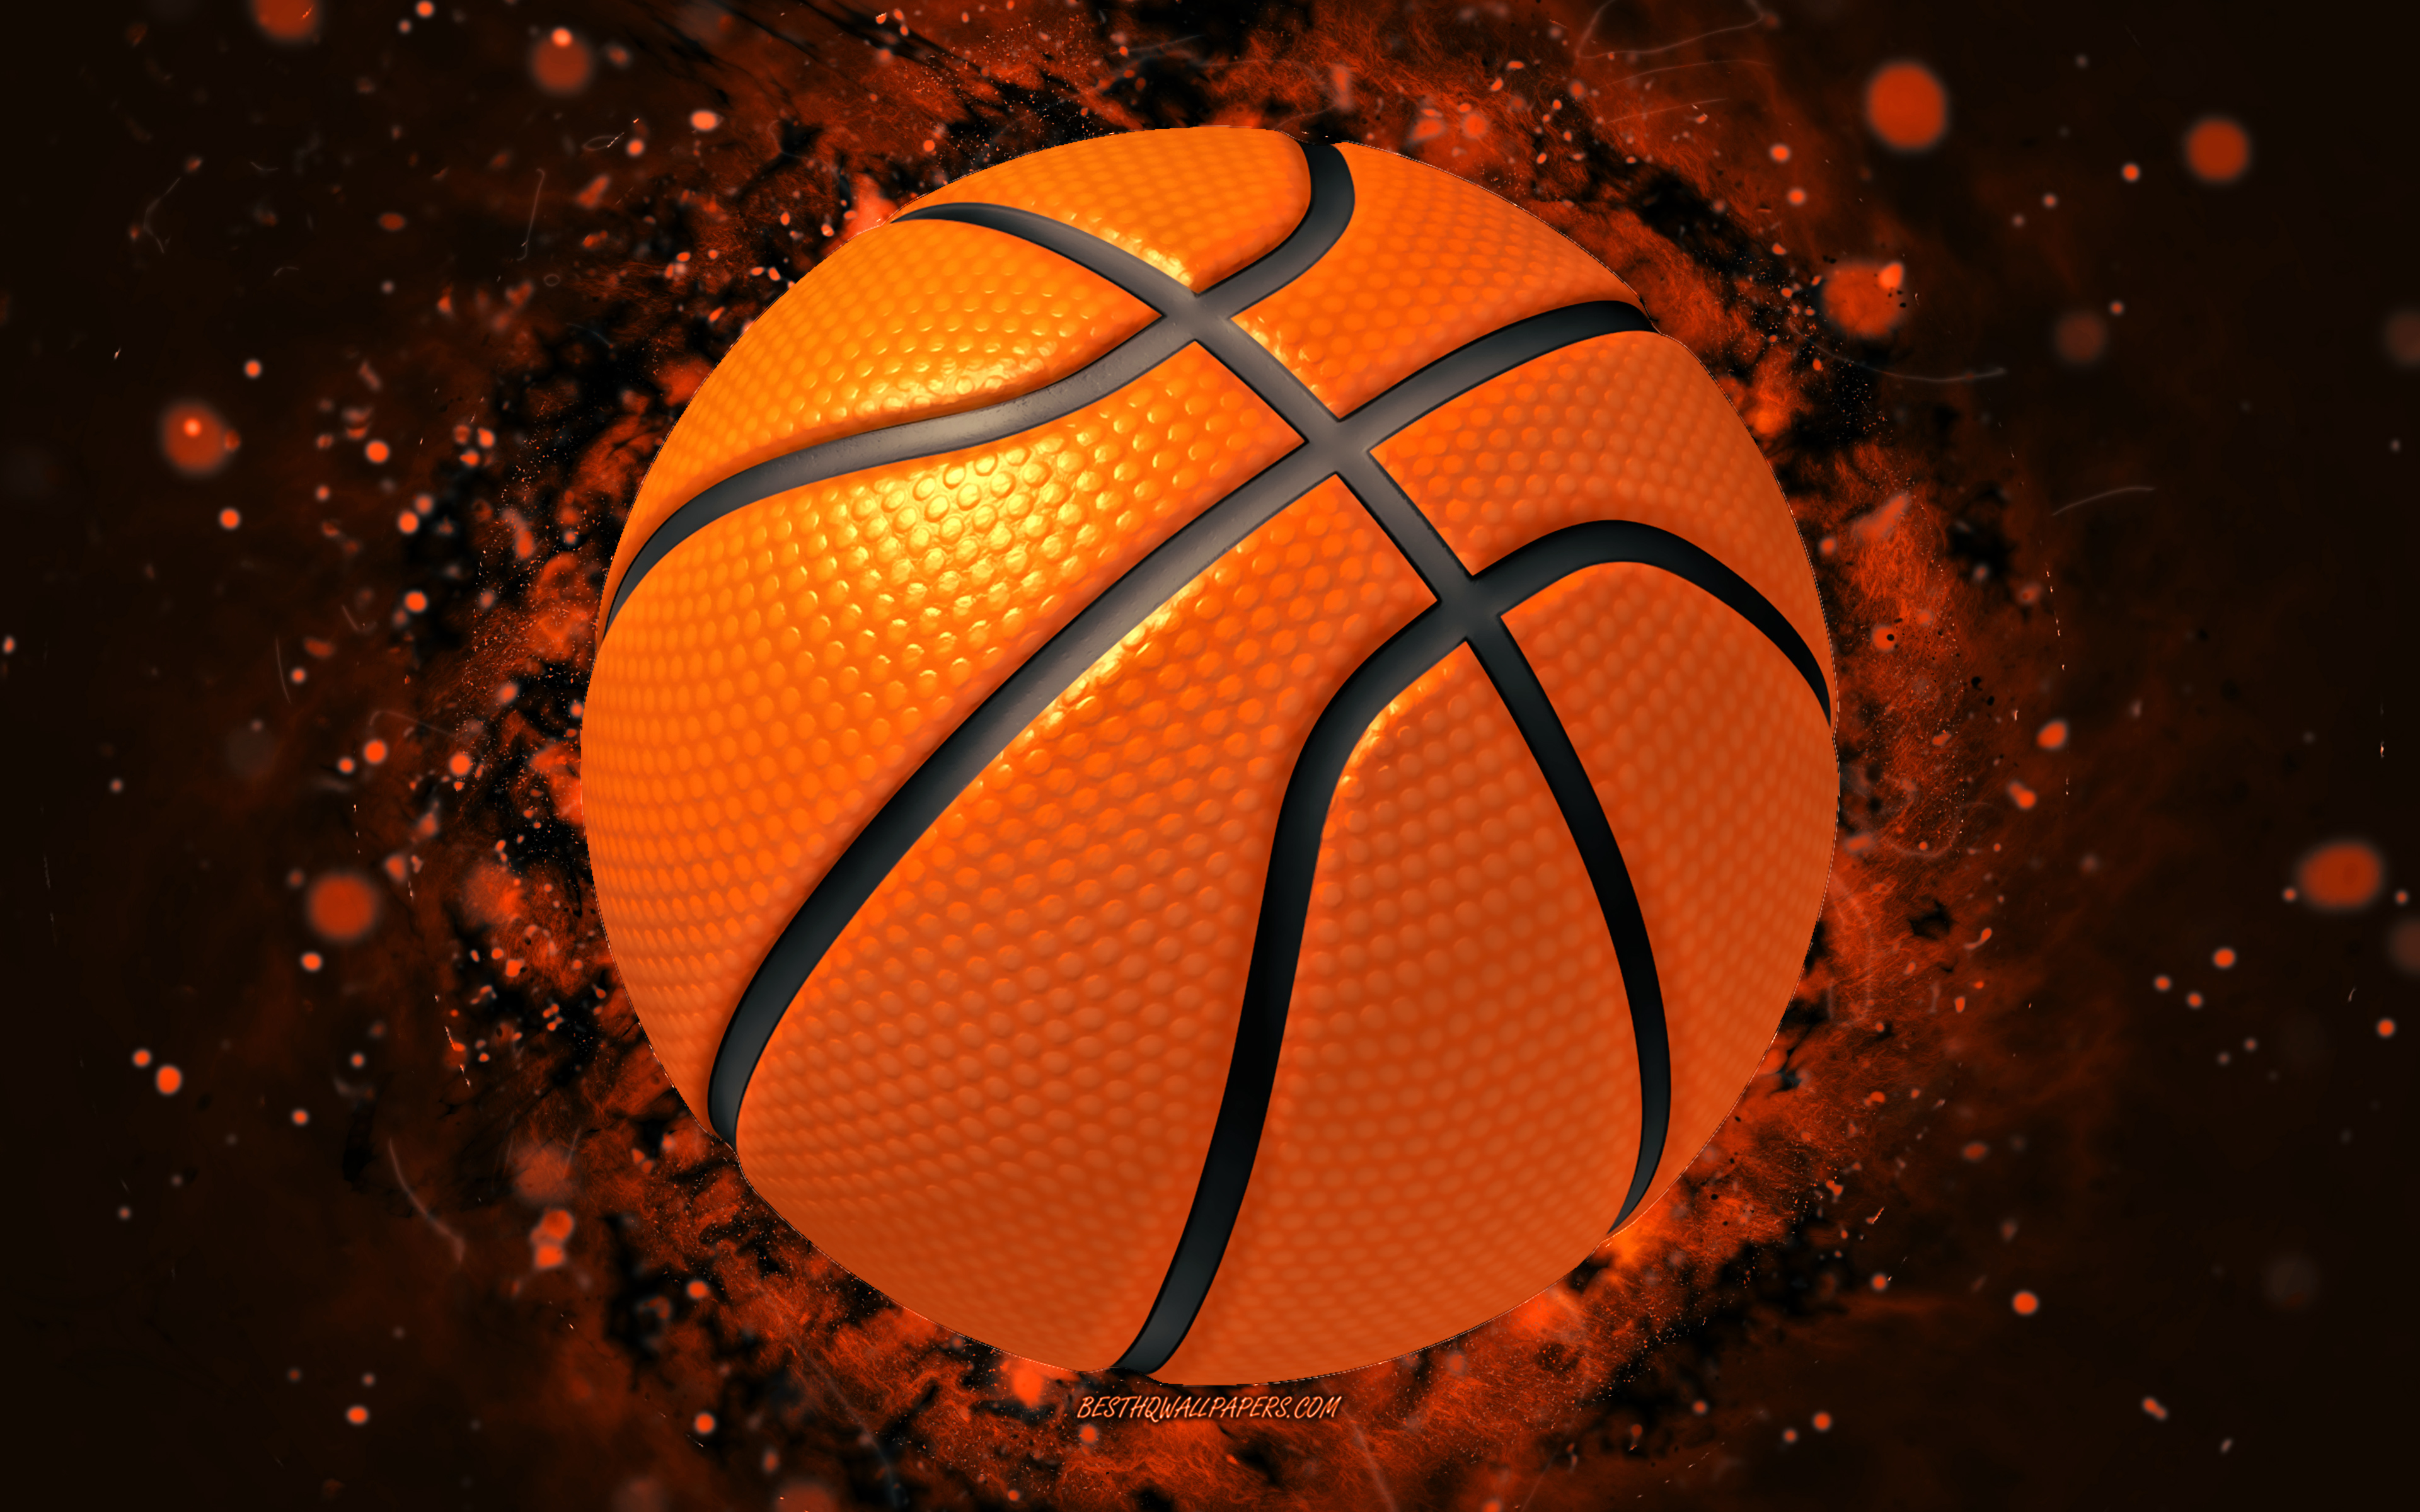 Download wallpaper basketball, 4k, orange neon lights, creative, sports background, abstract basketball for desktop with resolution 3840x2400. High Quality HD picture wallpaper